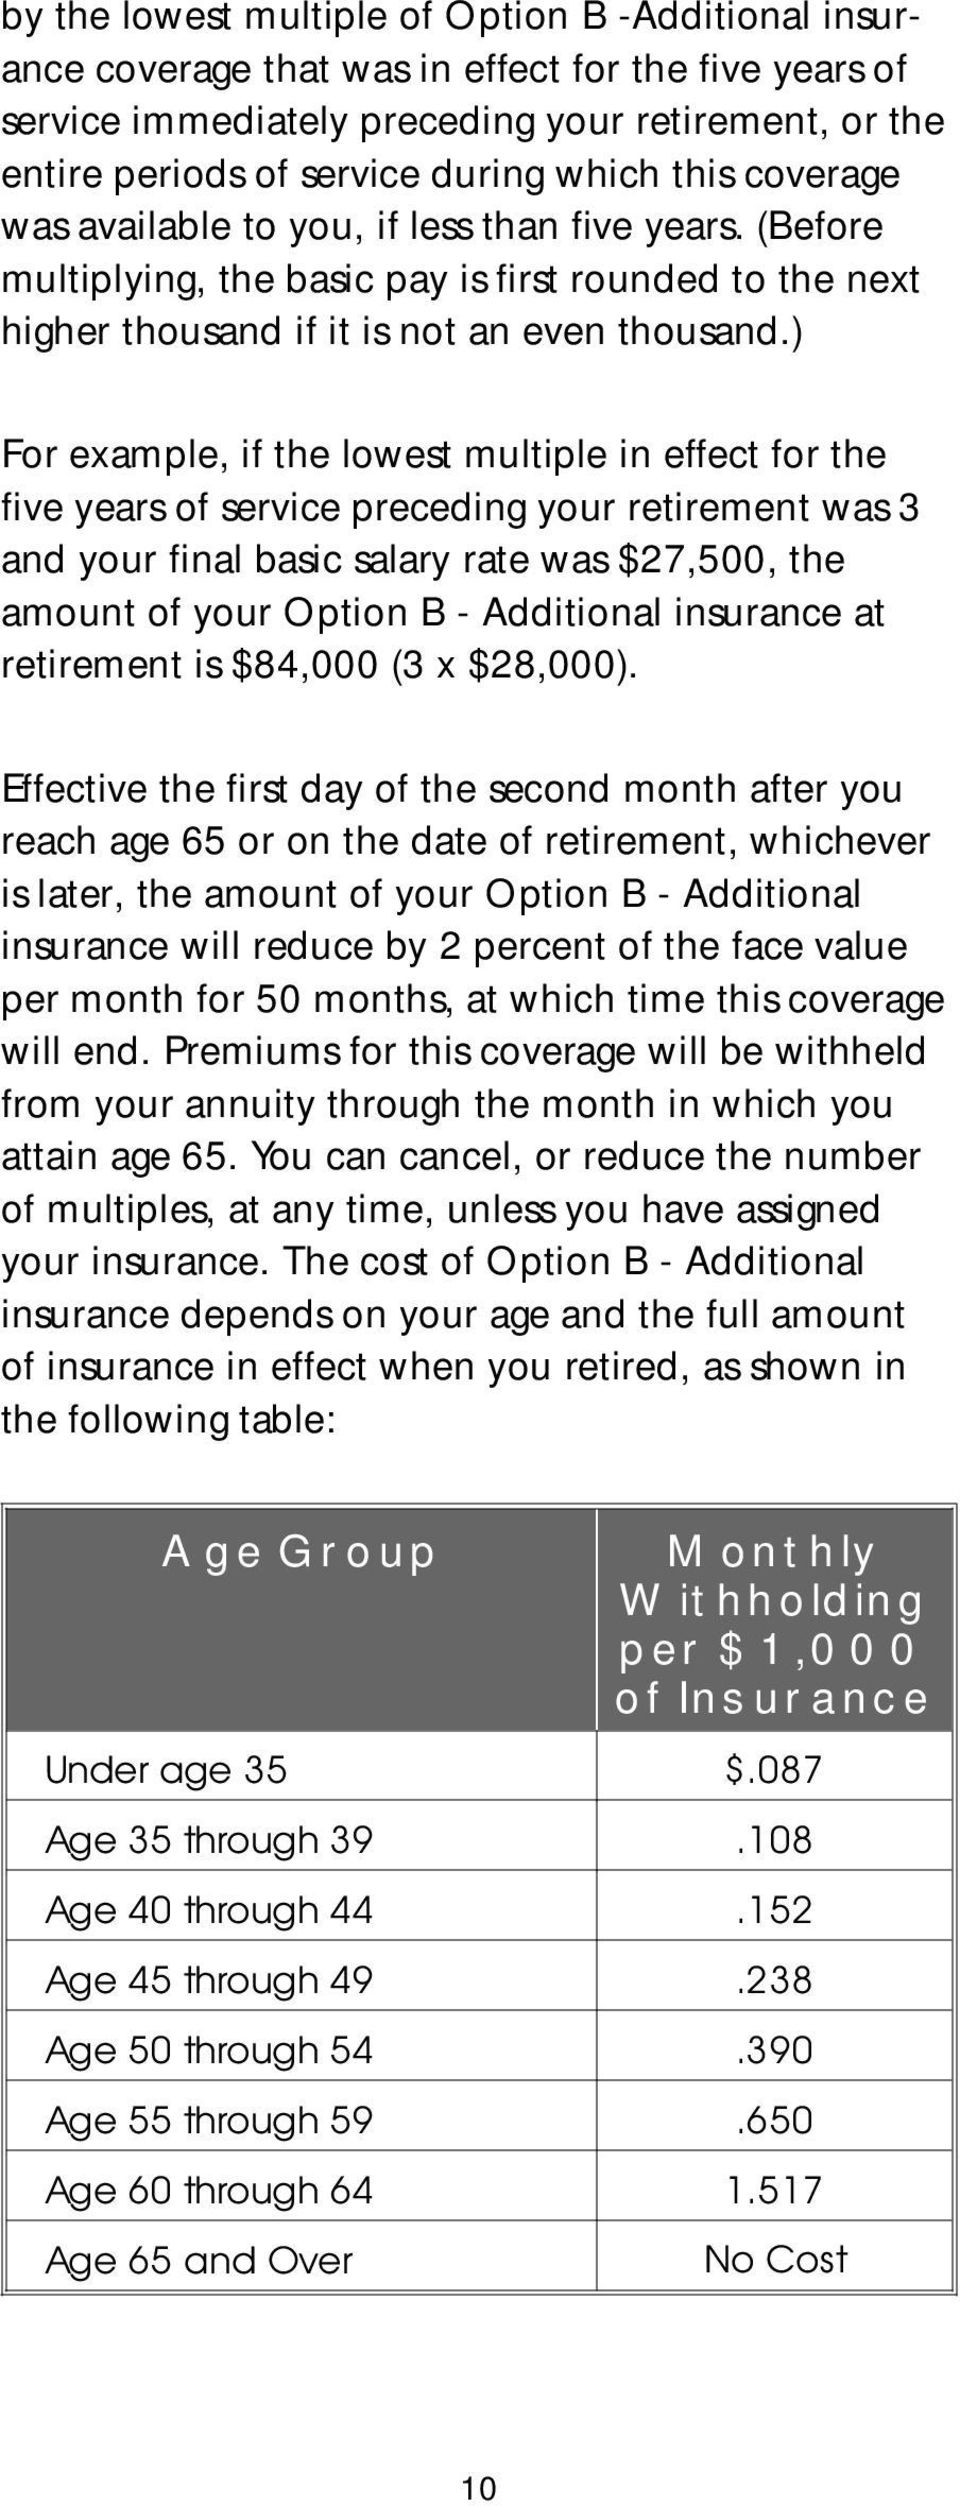 ) For example, if the lowest multiple in effect for the five years of service preceding your retirement was 3 and your final basic salary rate was $27,500, the amount of your Option B - Additional